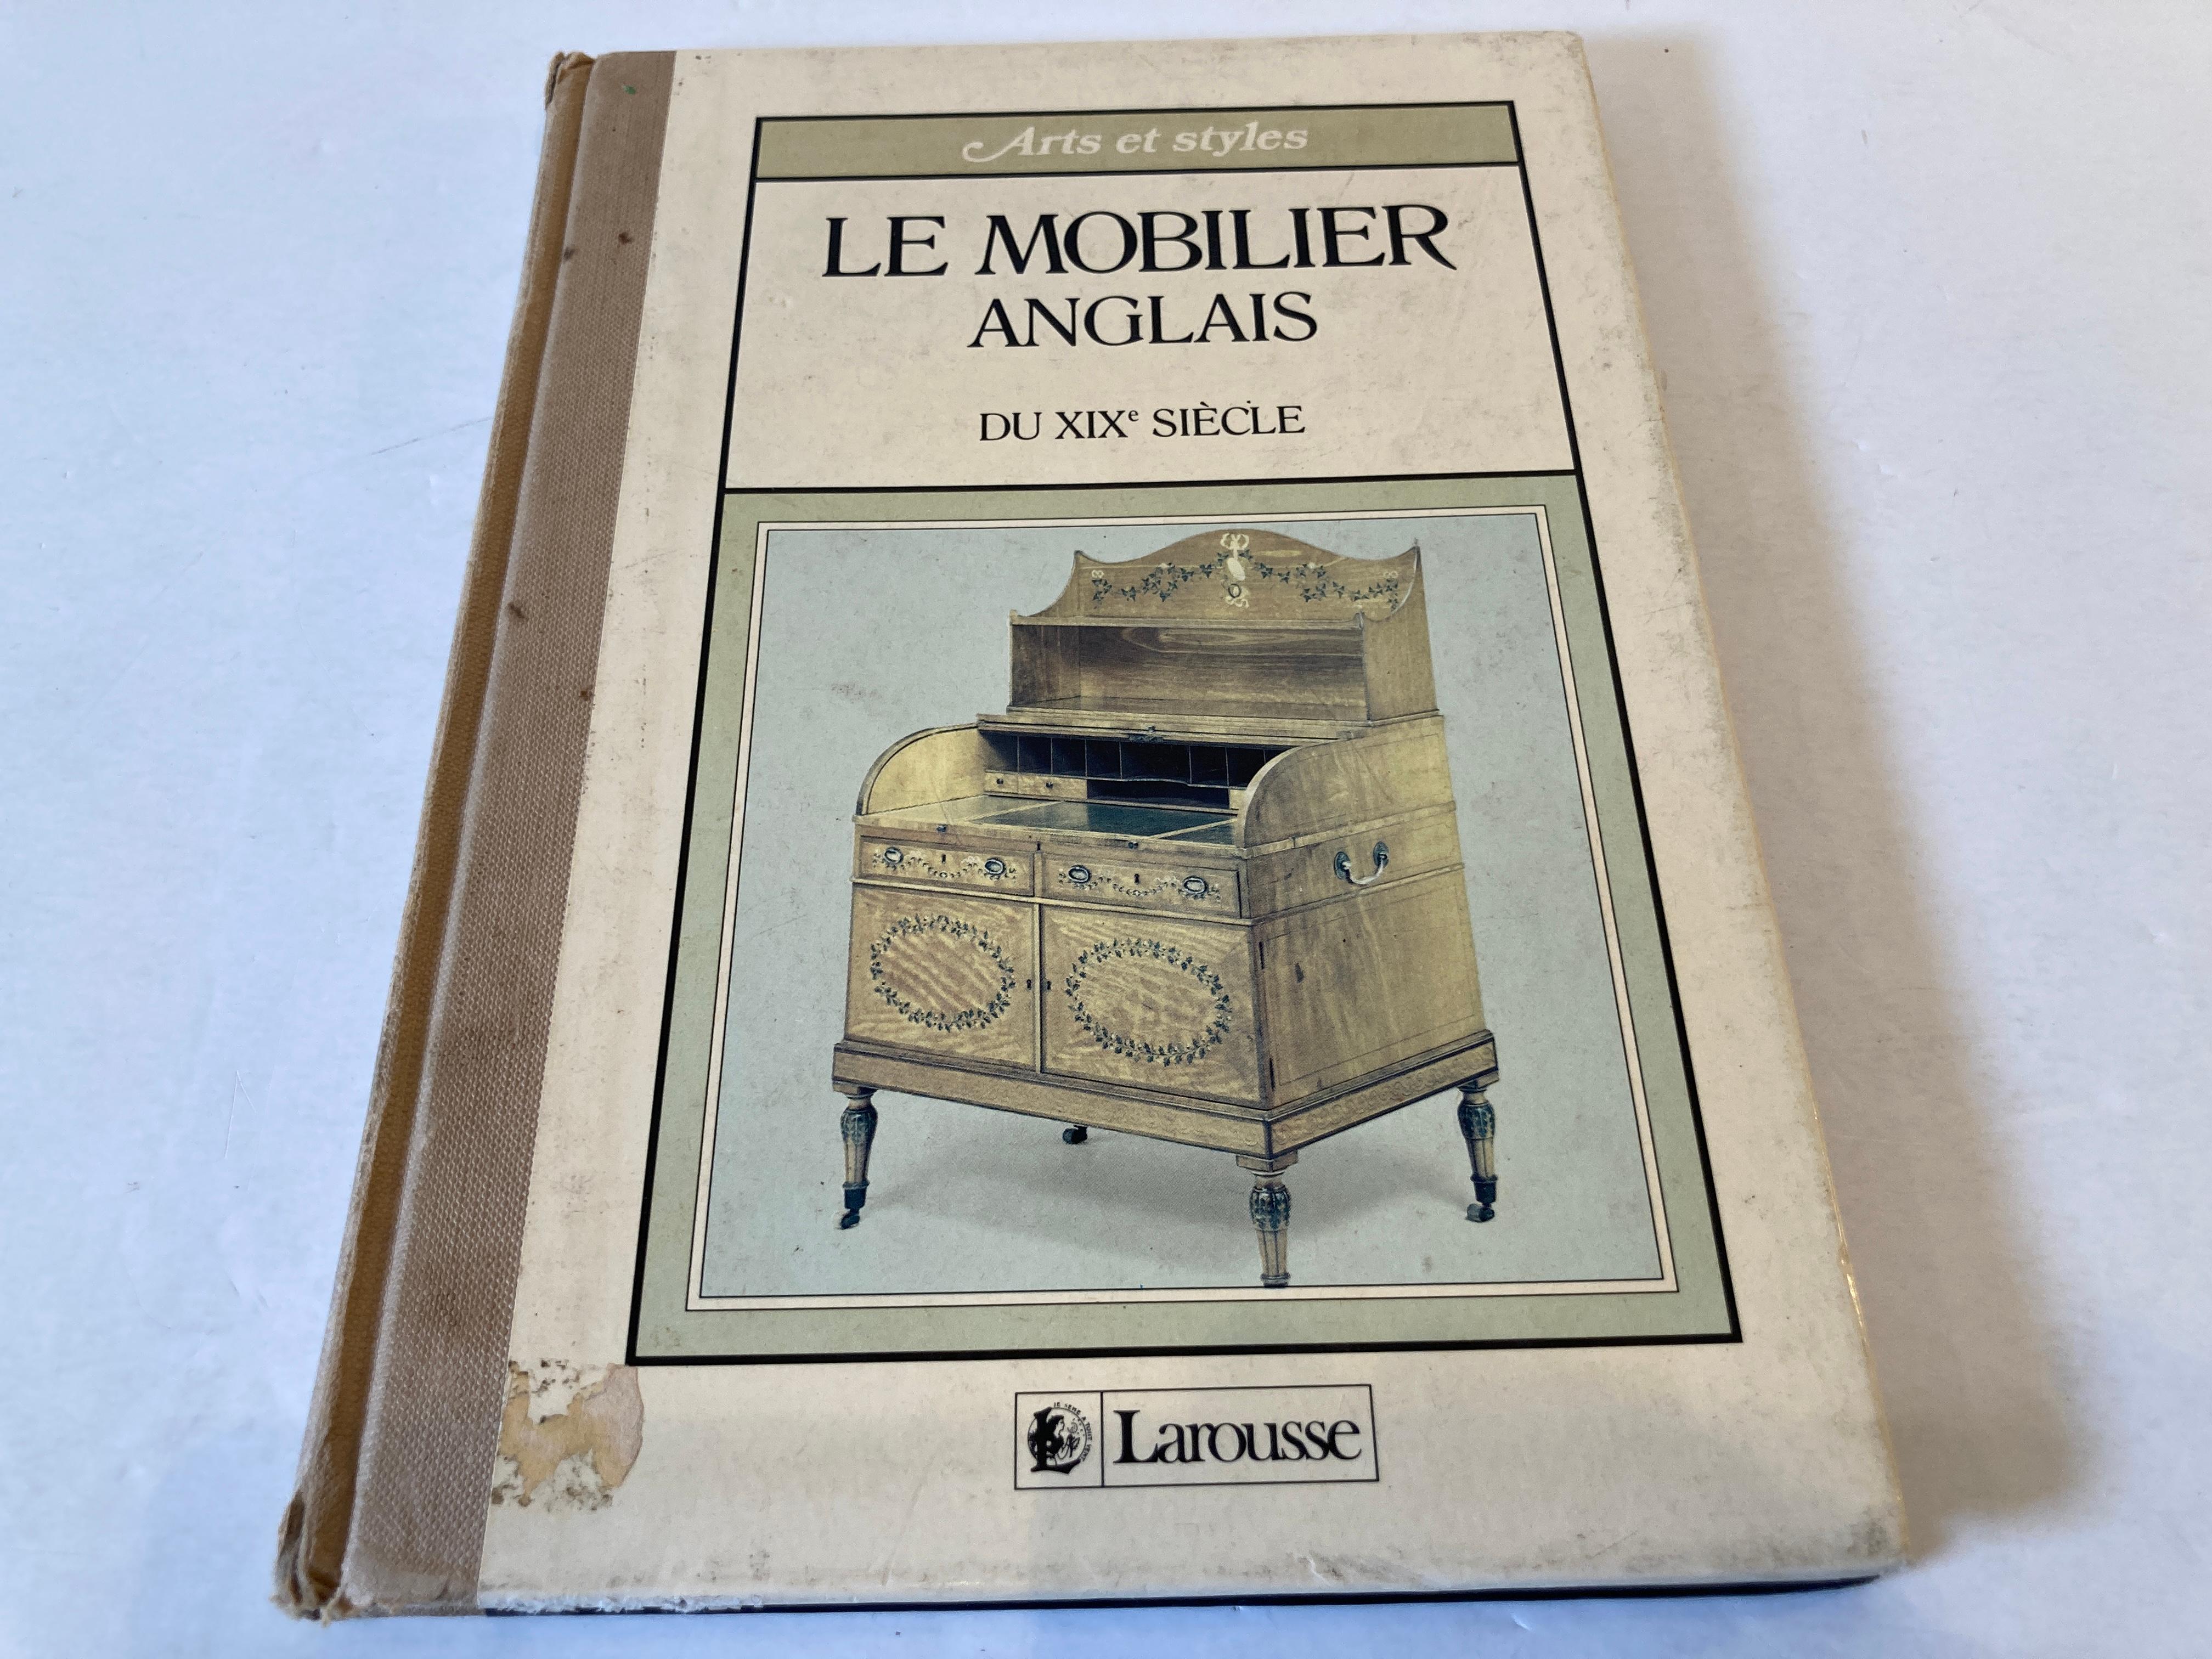 Le mobiler anglais du 19 eme siecle.
19th century English furniture By Alessandra Ponte Larousse.
Text in French.
Editor Larousse
Publication date 1986
Collection Arts and styles (6)
Number of pages 80
This is a beautiful book about British